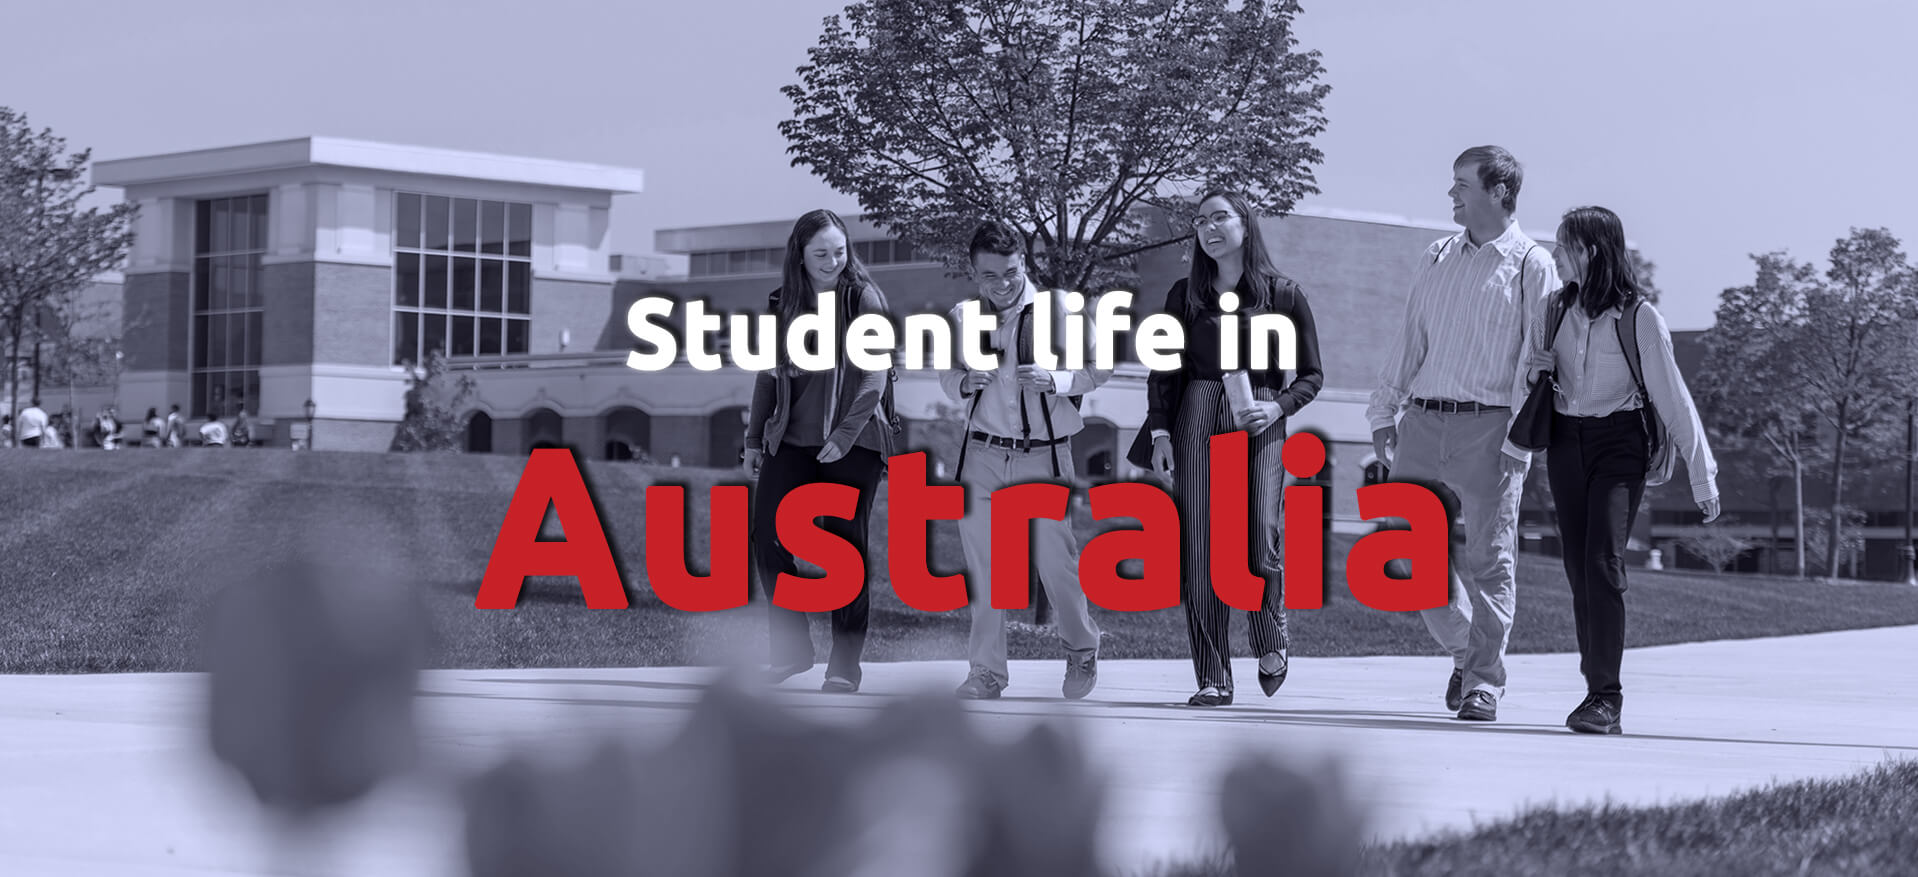 Students Life in AUS